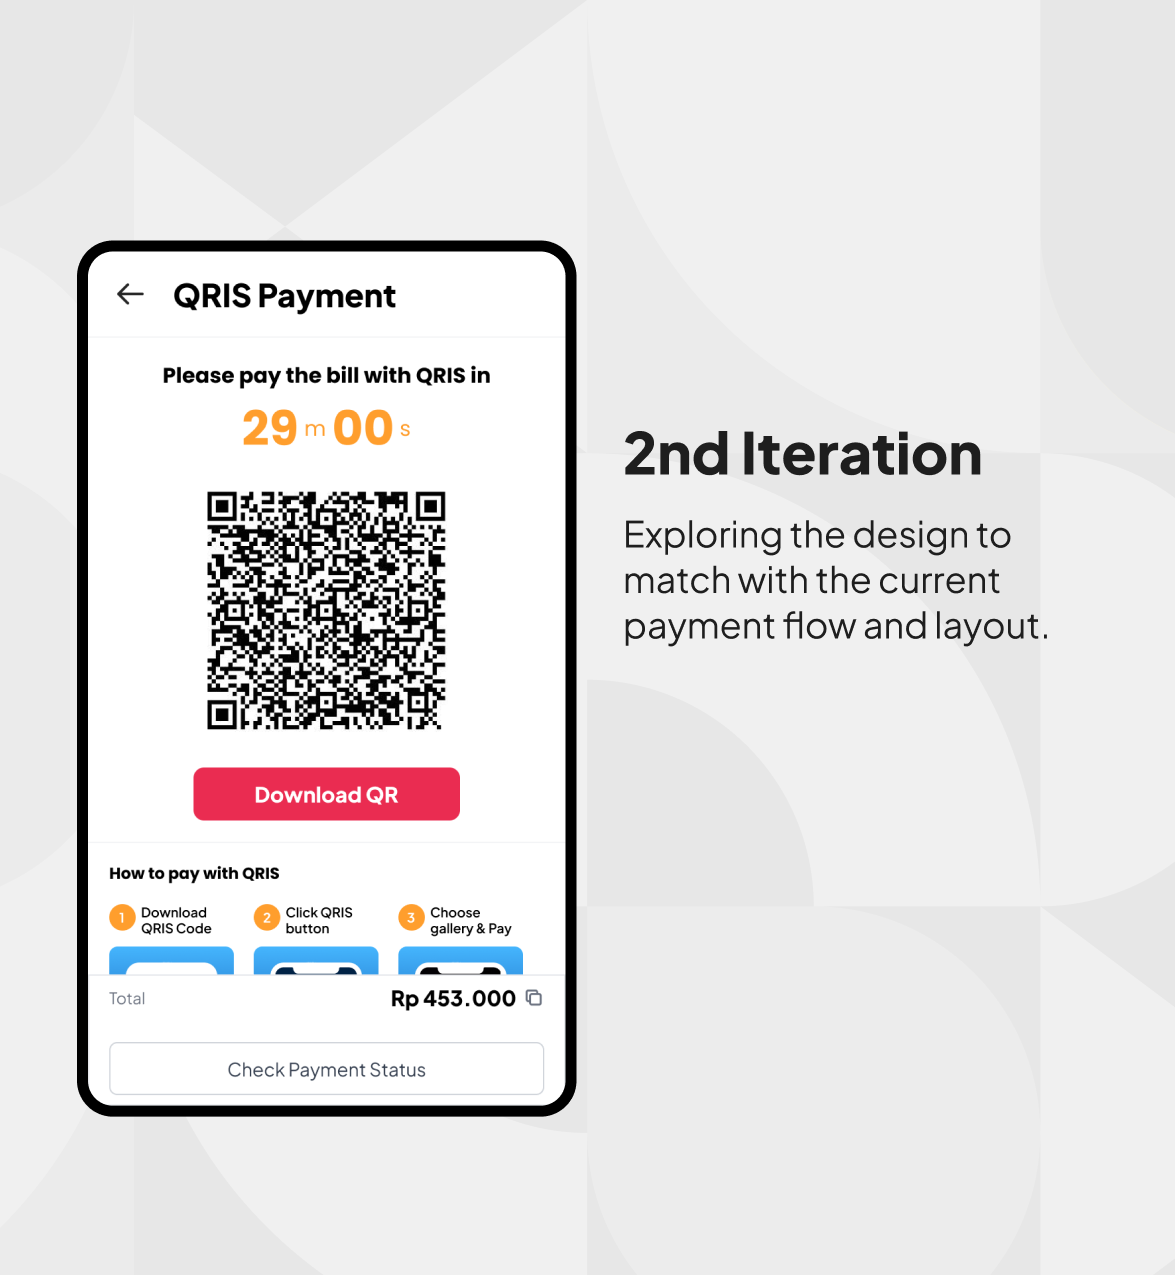 Pay with QRIS Screen Iterations